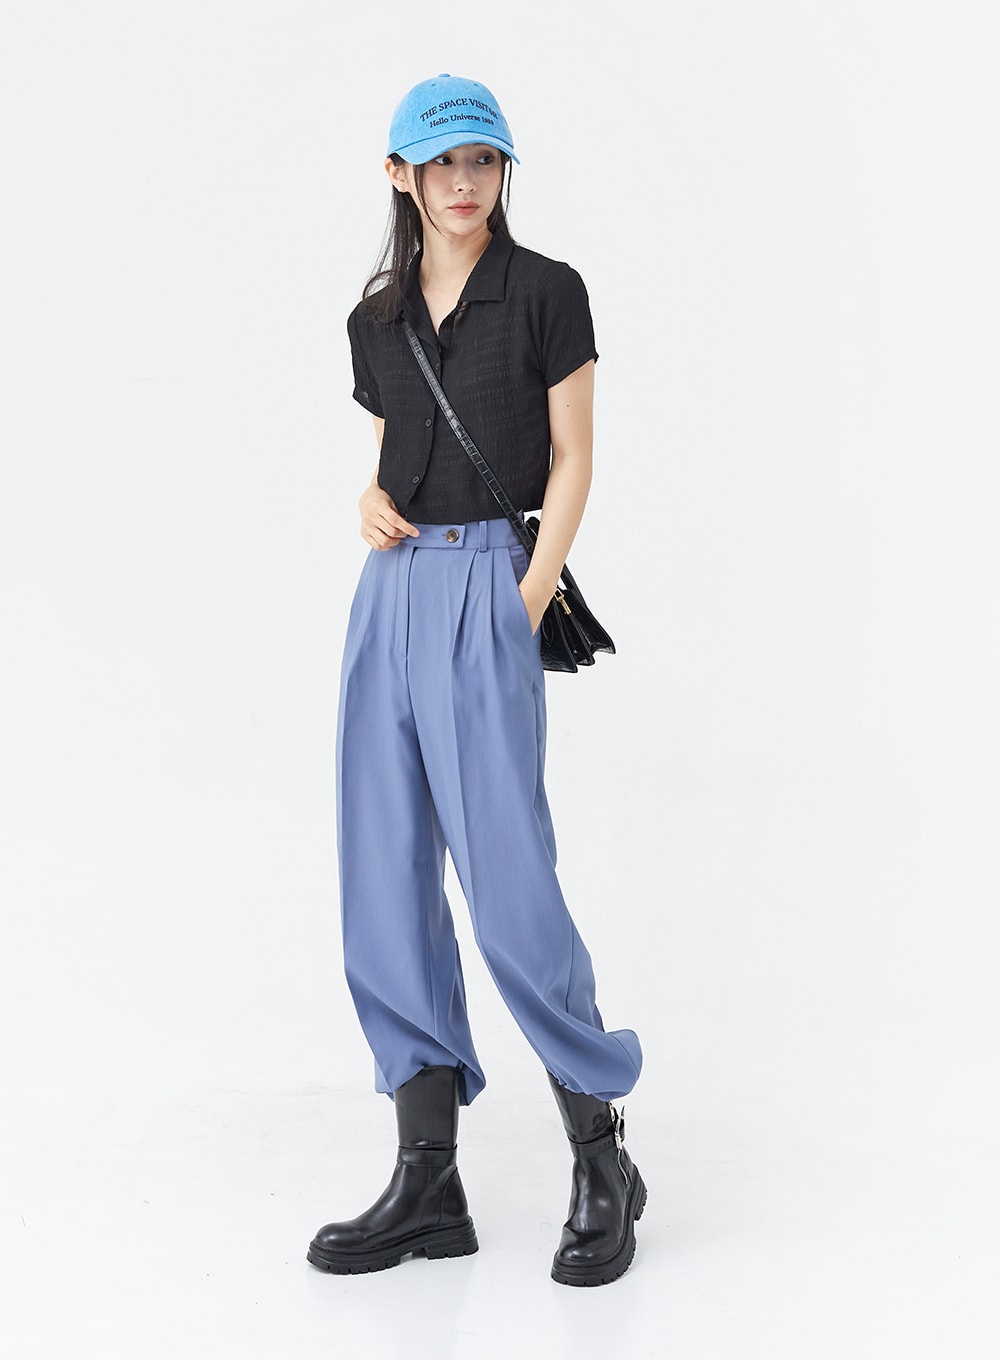 Cool Wrinkle Cropped Blouse with Collar OG12